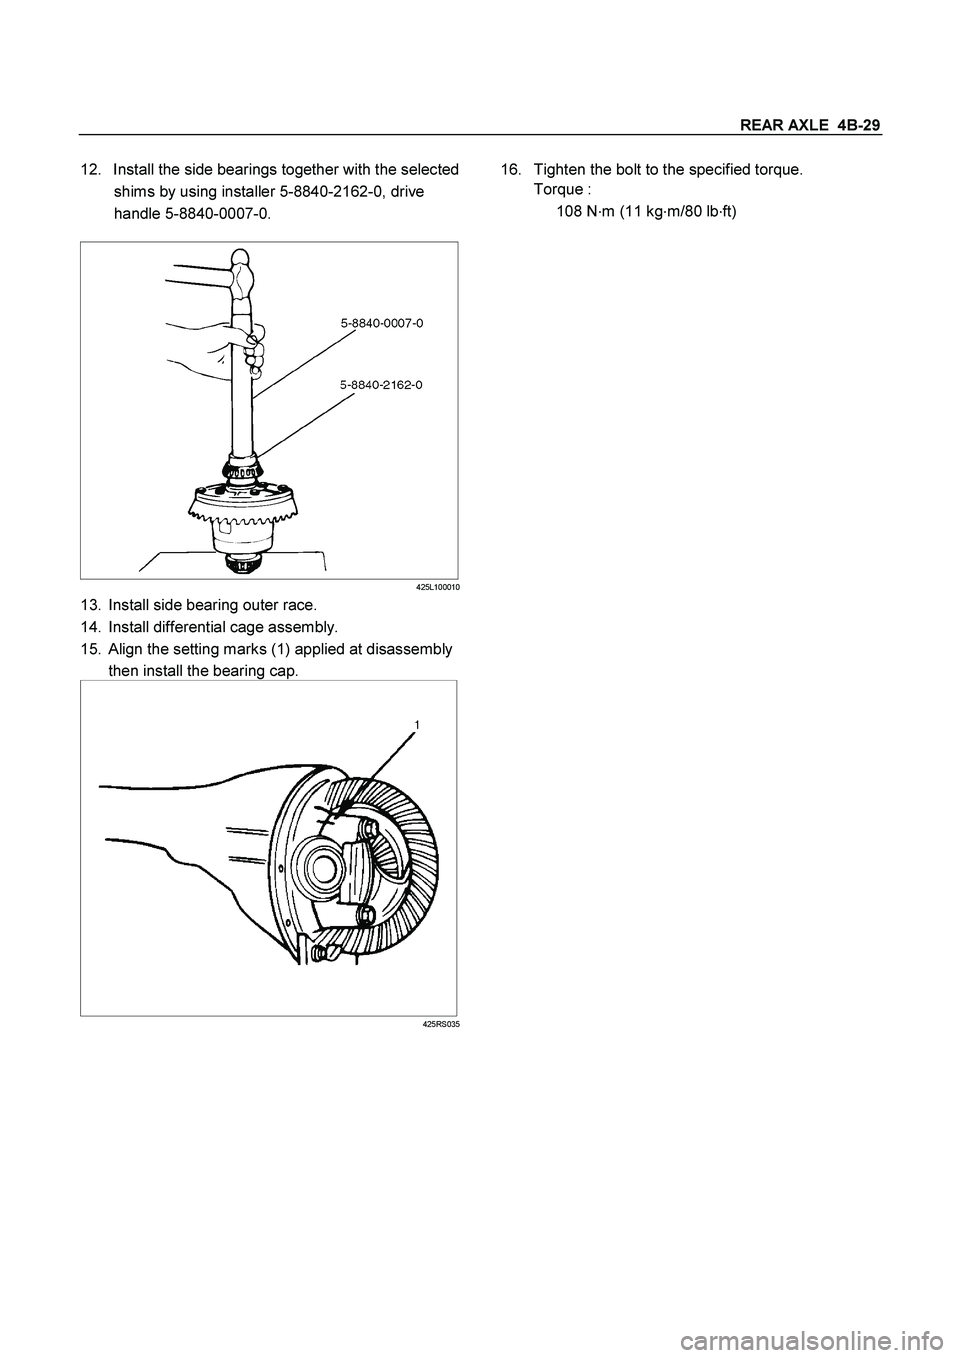 ISUZU TF SERIES 2004  Workshop Manual REAR AXLE  4B-29
 
12.  Install the side bearings together with the selected 
shims by using installer 5-8840-2162-0, drive 
handle 5-8840-0007-0. 
 
425L100010
13.  Install side bearing outer race. 
